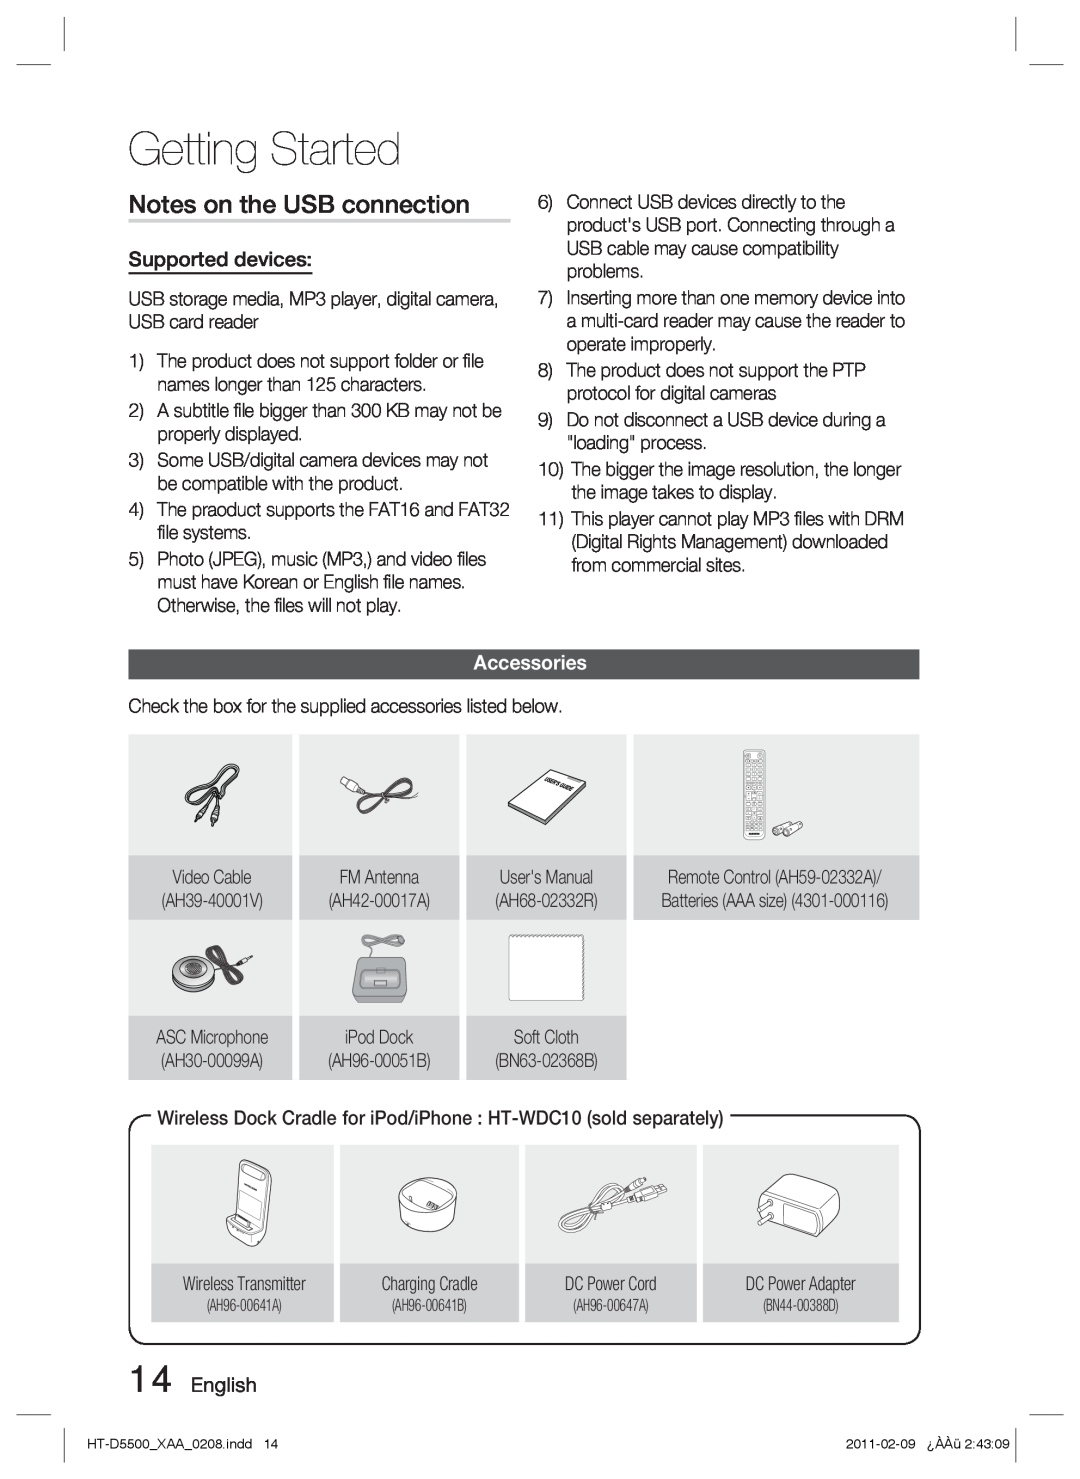 Samsung D5500 user manual Notes on the USB connection, Accessories, Getting Started 